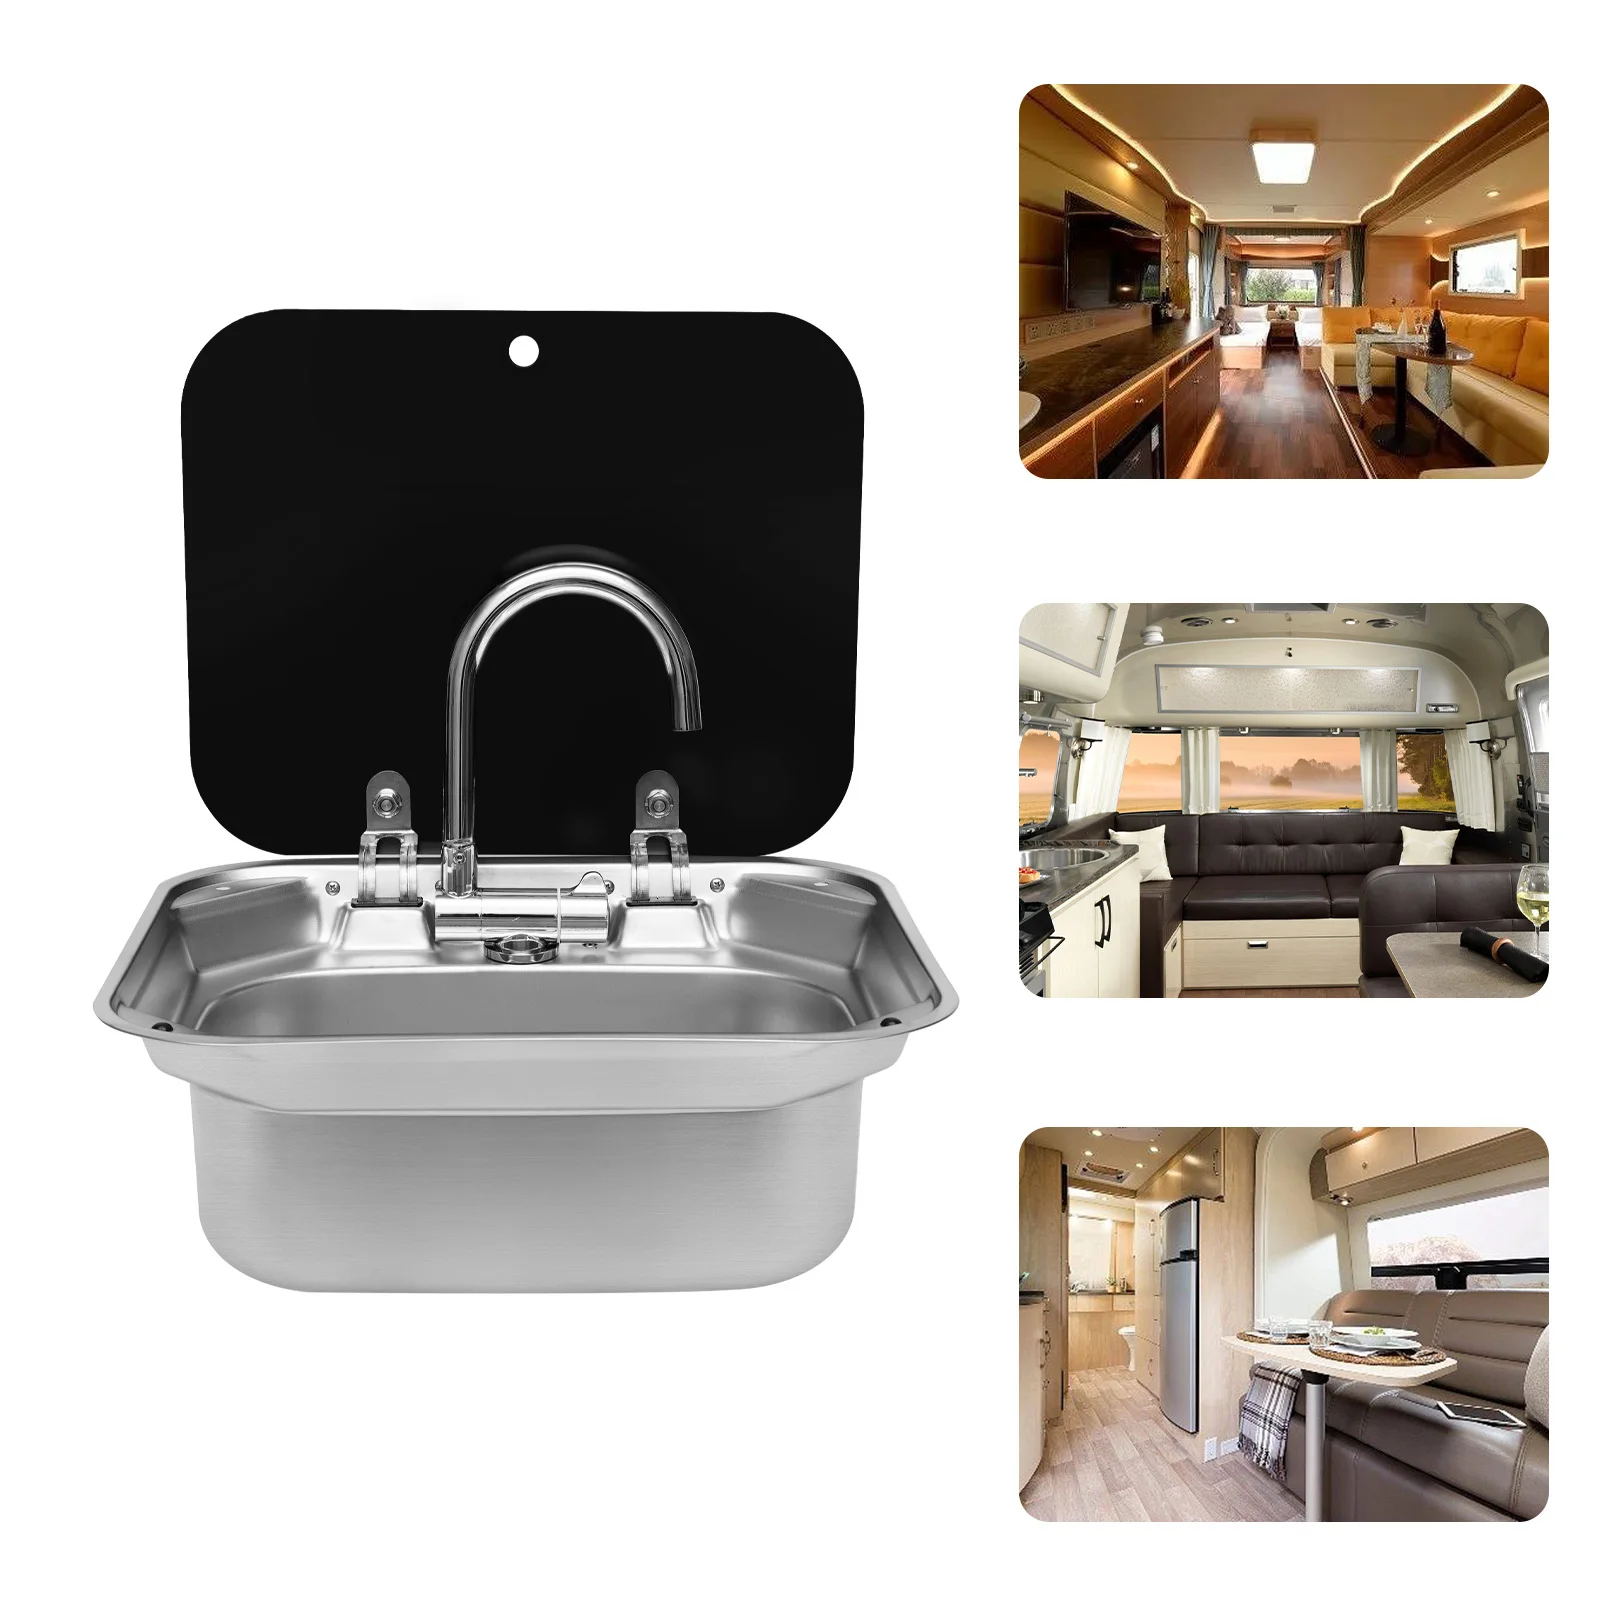 

Steel Hand Wash Basin Sink with tap with Folded Faucet Tempered Glass Lid van Camper Trailer Accessories for RV Caravan or Boat